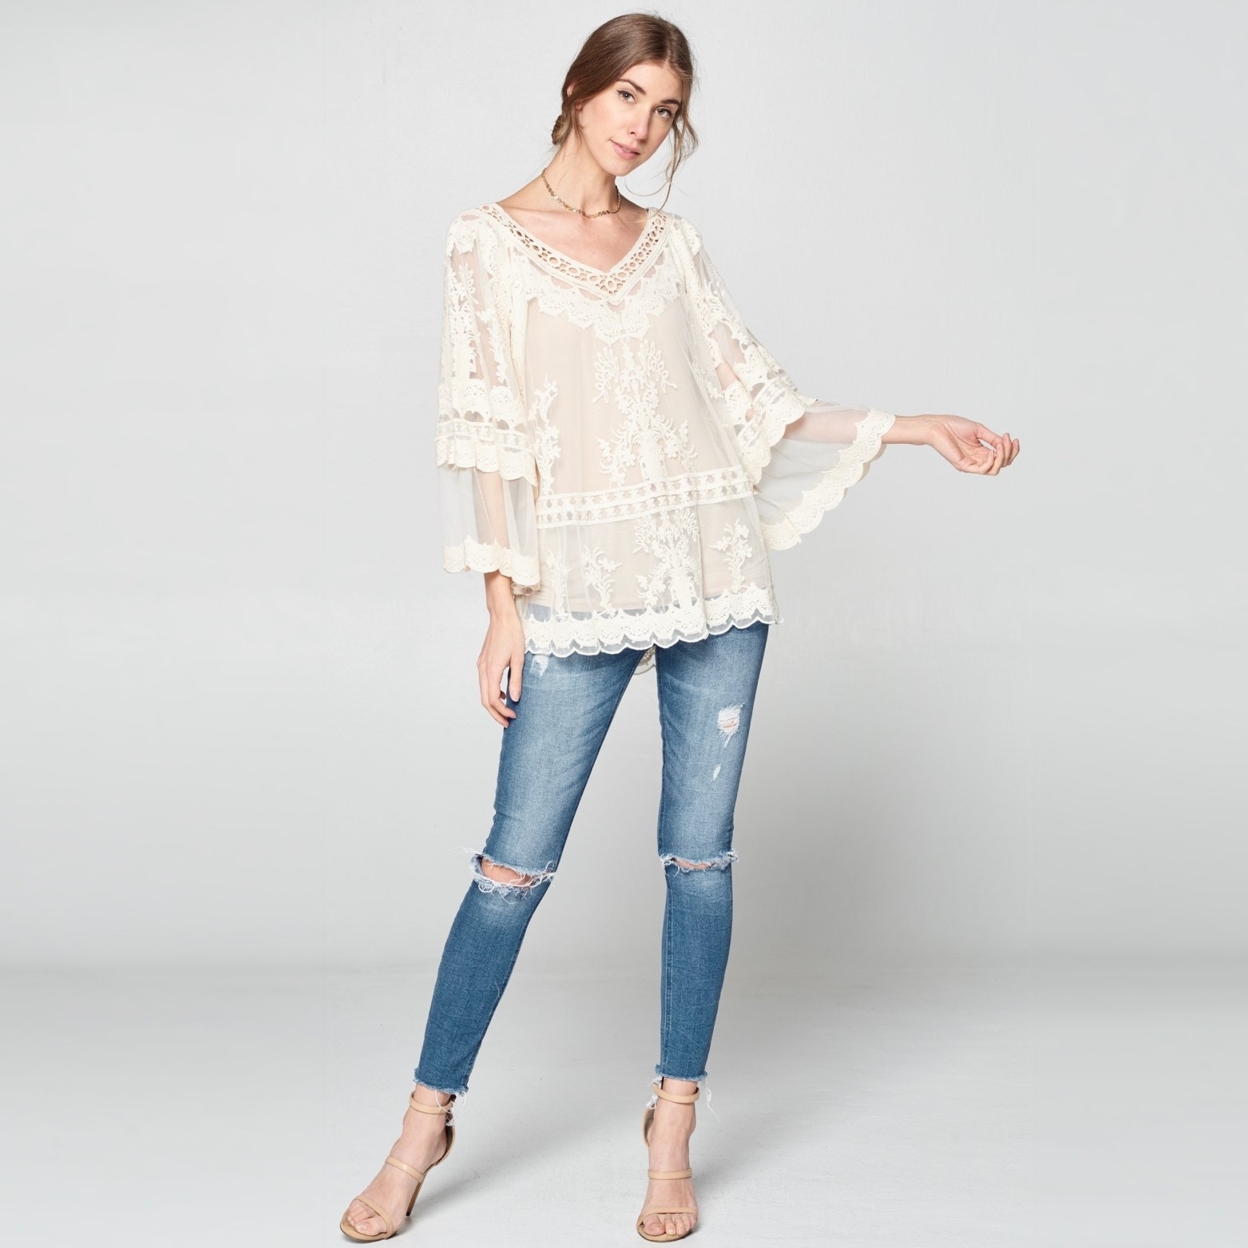 Embroidered Fleur Lace Top - Ivory, Medium (8-10)